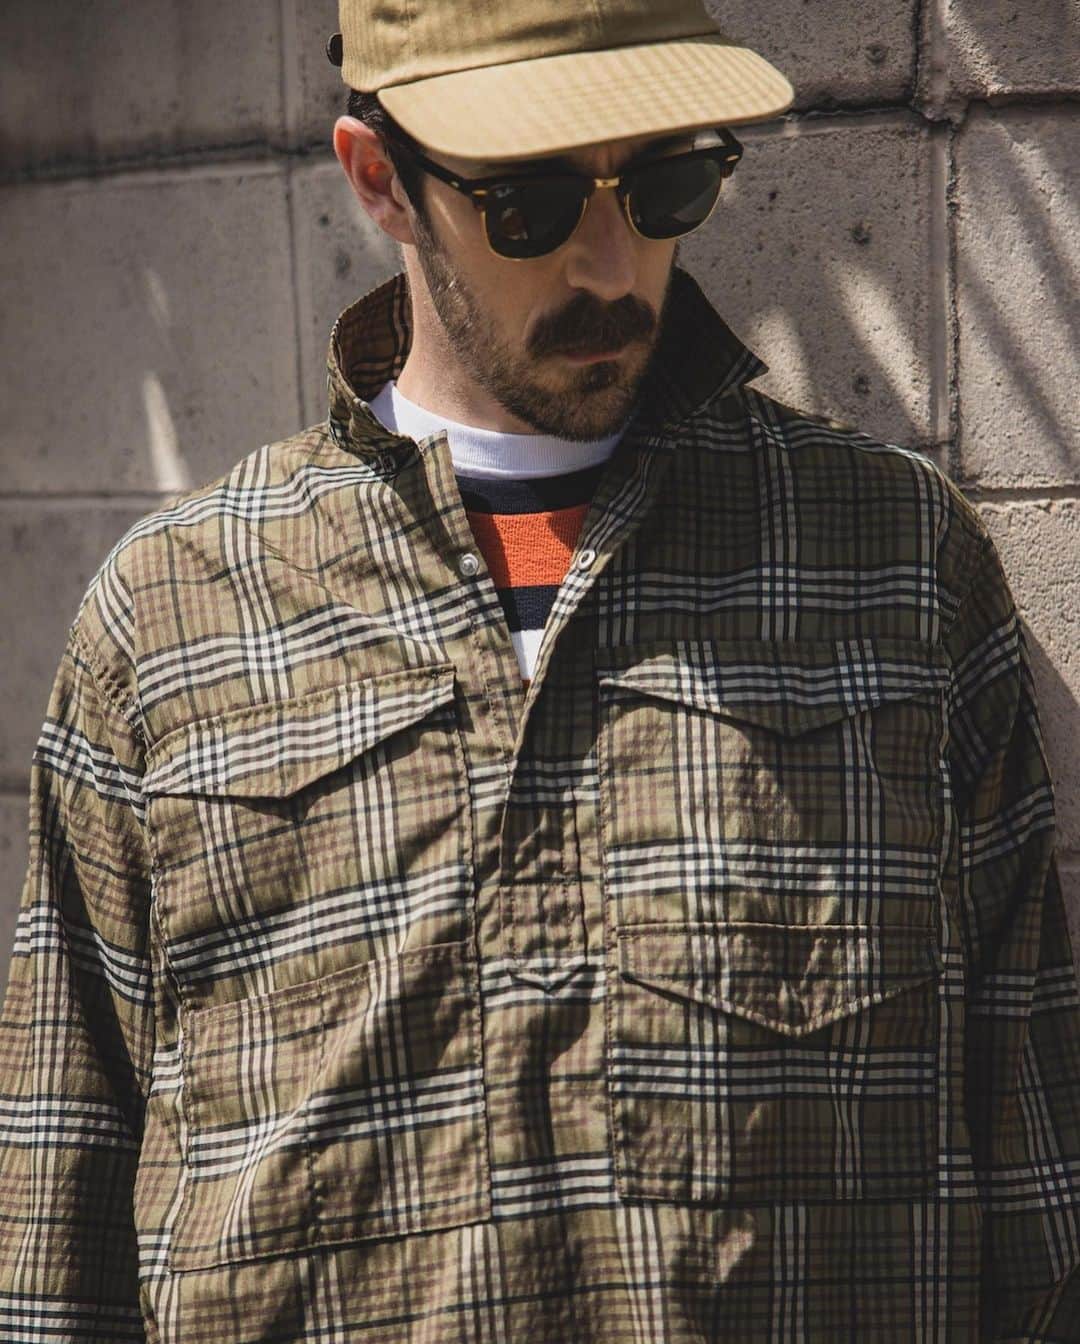 BEAMS+さんのインスタグラム写真 - (BEAMS+Instagram)「... The BEAMS PLUS "Adventure Shirt" is inspired by Vintage outdoor wear. ---------- ●Adventure Shirt Nylon Ripstop Stretch Full of pocket details such as a double yoke design from the shoulder to the chest on the front and pockets that also serve as glass holders. Ripstop nylon with a lightweight texture and a touch that feels like a natural material. It also stretches wel, you never feel any stress. The crispness and firmness are also its attractive features of this fabric.  ●Adventure Shirt Ⅲ Hybrid Polyester Check The "Adventure Shirt III" is a pullover style based on outdoor wear from the 1950s. The design of this product is very engaging with four flap pockets on the front and various pockets on the sides. The cuffs are finished with outer-like snap buttons. Based on the idea of making the "Indian Madras" material tougher look and feel, this material is developed with a yarn-dyed check material woven with polyester yarns. The lightness and coolness of the Indian Madras fabric is maintained, while the material is updated to be more practical.  シャツとは思えないほど、細部にこだわったポケットデザインが魅力的。Vintageのアウトドアウエアからインスピレーションした、BEAMS PLUSの『アドベンチャーシャツ』 ---------- ●Adventure Shirt Nylon Ripstop Stretch 前身頃の肩から胸にかけて2重のヨークを施したデザインや、グラスホルダーを兼ねたポケットなど、ポケットディテール満載。 軽い質感、まるで天然素材のようなタッチ感が特徴のリップストップナイロン。ストレッチの機能もあり、ストレスフリーな着心地を実現。シャリ感とハリコシが魅力的。  ●Adventure Shirt Ⅲ Hybrid Polyester Check 1950年代のアウトドアウエアをベースにプルオーバー型を採用した『Adventure Shirt Ⅲ』。前身頃に4つのフラップポケットや、サイドに多彩なポケットを配置したデザインが魅力的。カフ部分はアウターライクなスナップボタン仕様。 『インディアンマドラスの素材を、もう少しタフな雰囲気で。』そんなイメージで作り込んだこの素材は、ポリエステル糸で織り上げた先染めチェック素材。軽さや清涼感はインディアンマドラスの雰囲気を保ちつつ、より実用的な素材へとアップデートしています。 . @beams_plus  @beams_plus_harajuku @beams_plus_yurakucho  #beamsplus」5月11日 19時55分 - beams_plus_harajuku